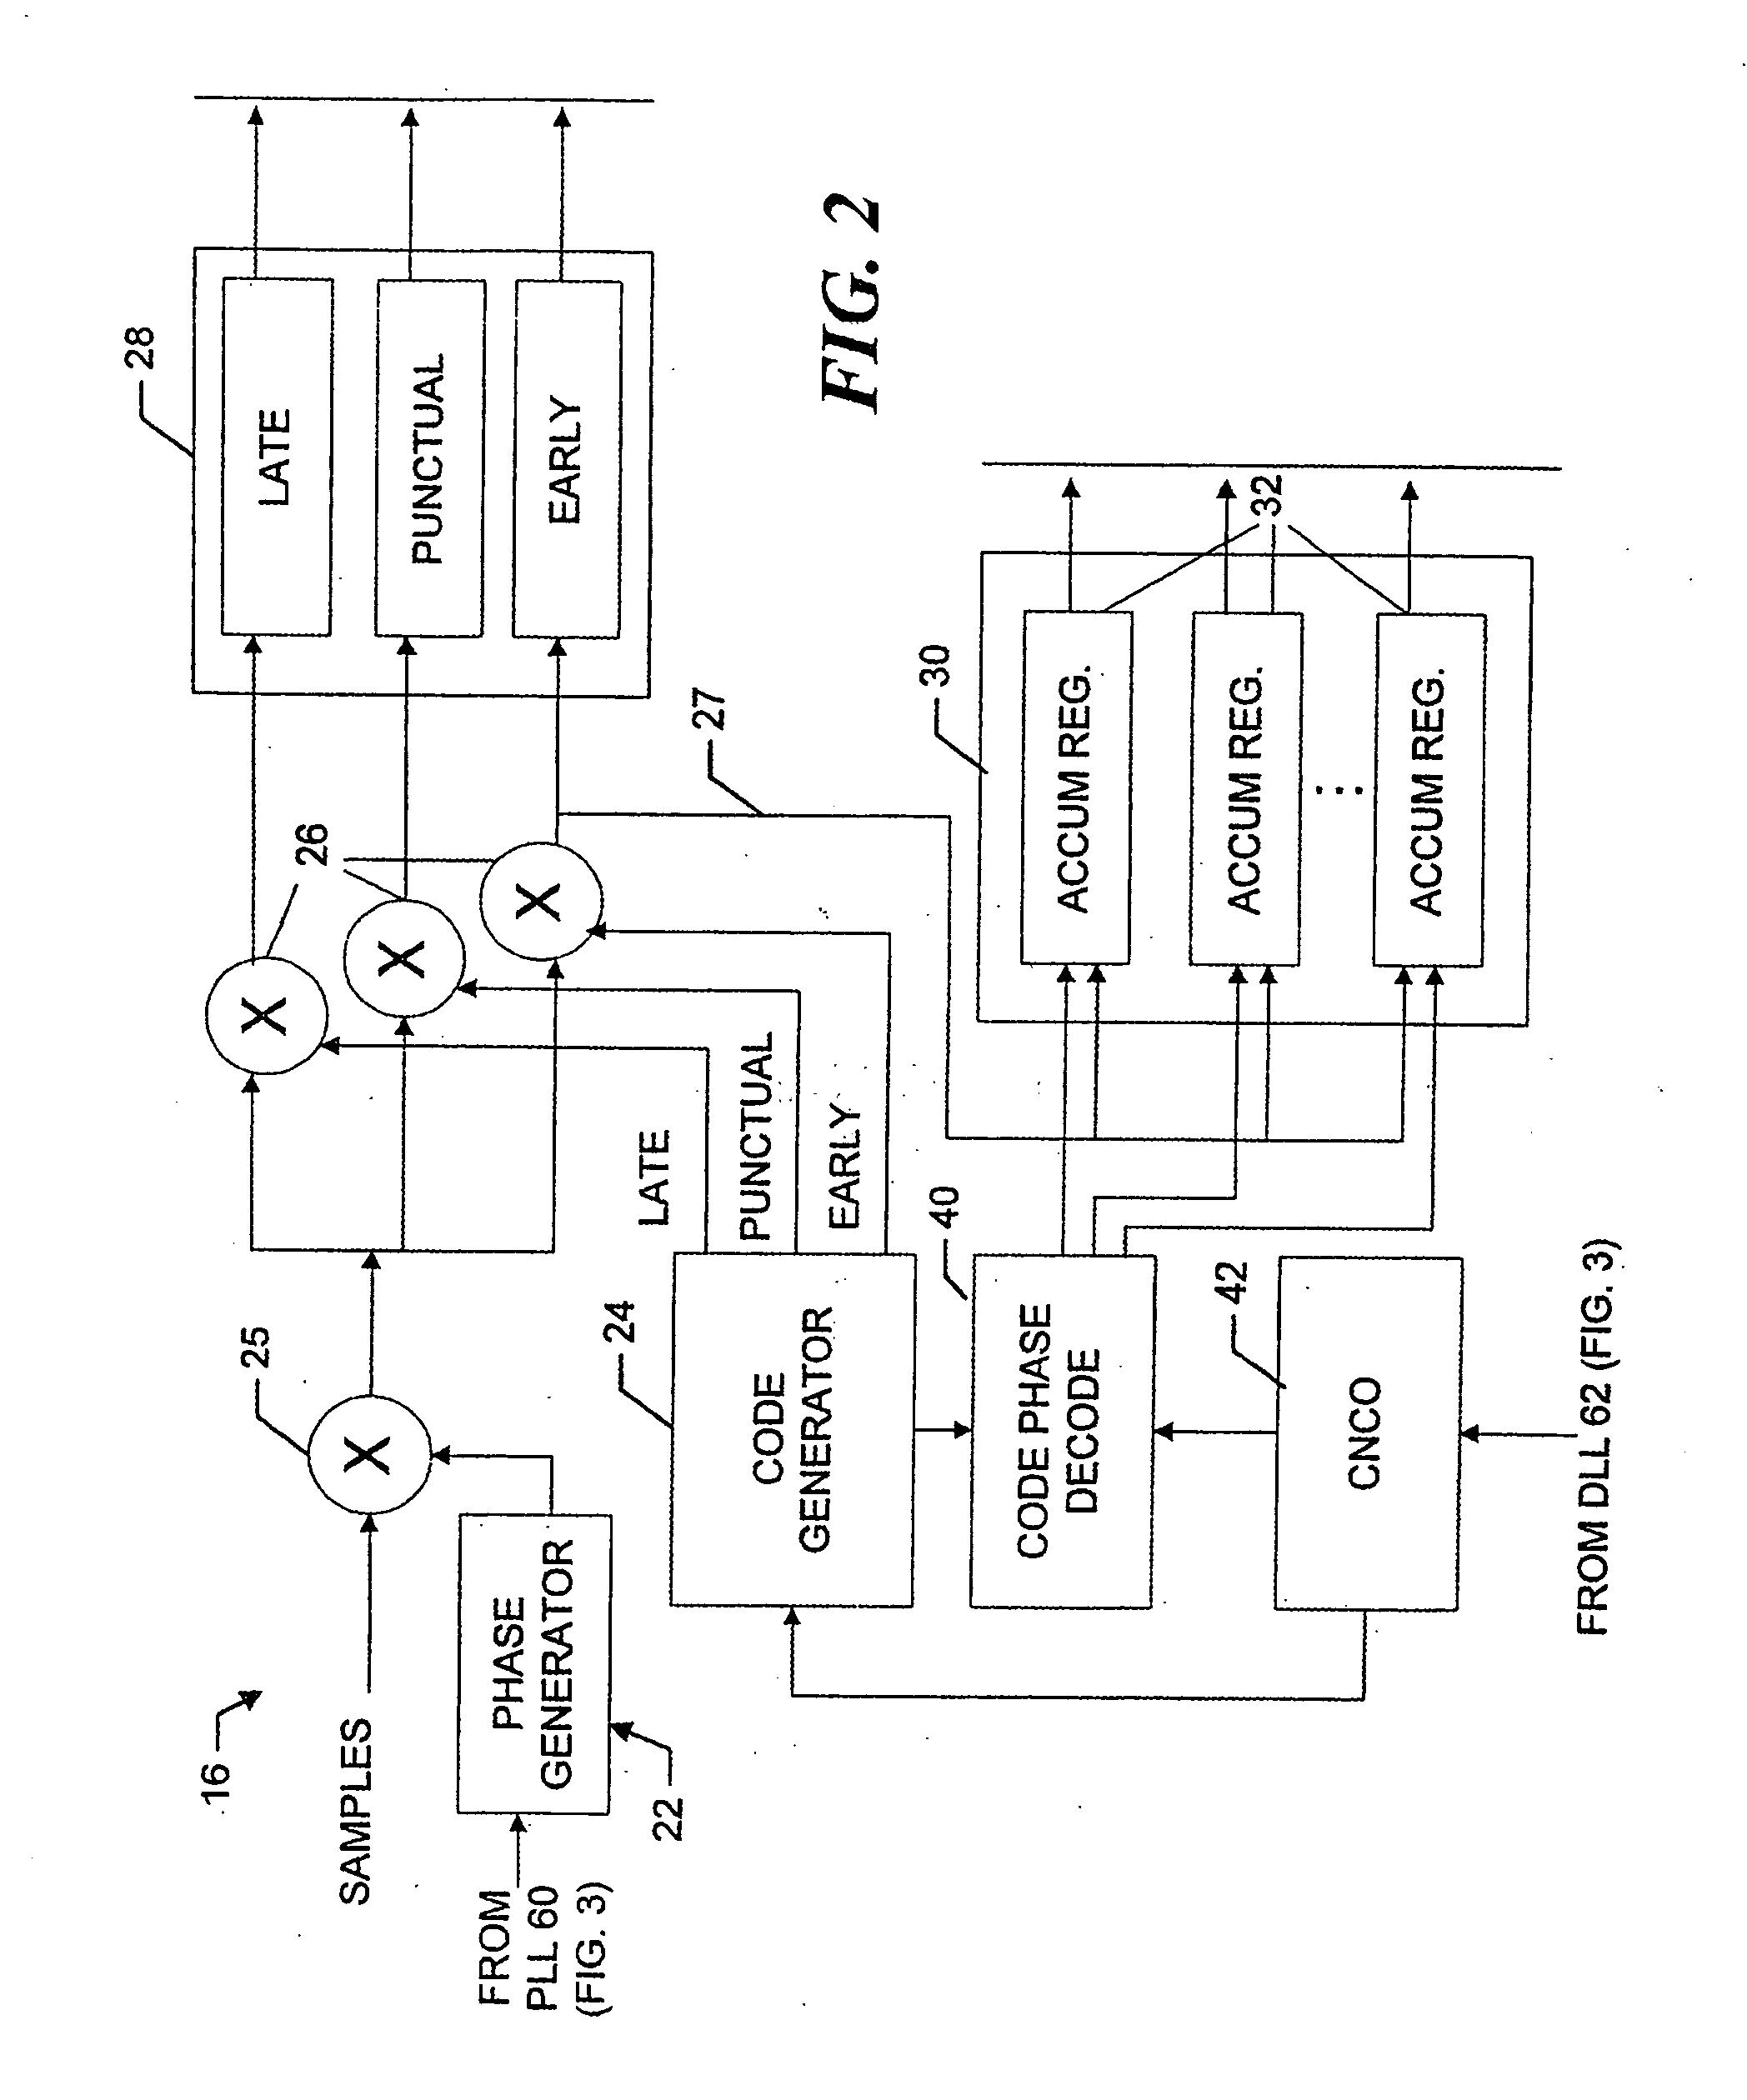 Apparatus for and method of correlating to rising chip edges